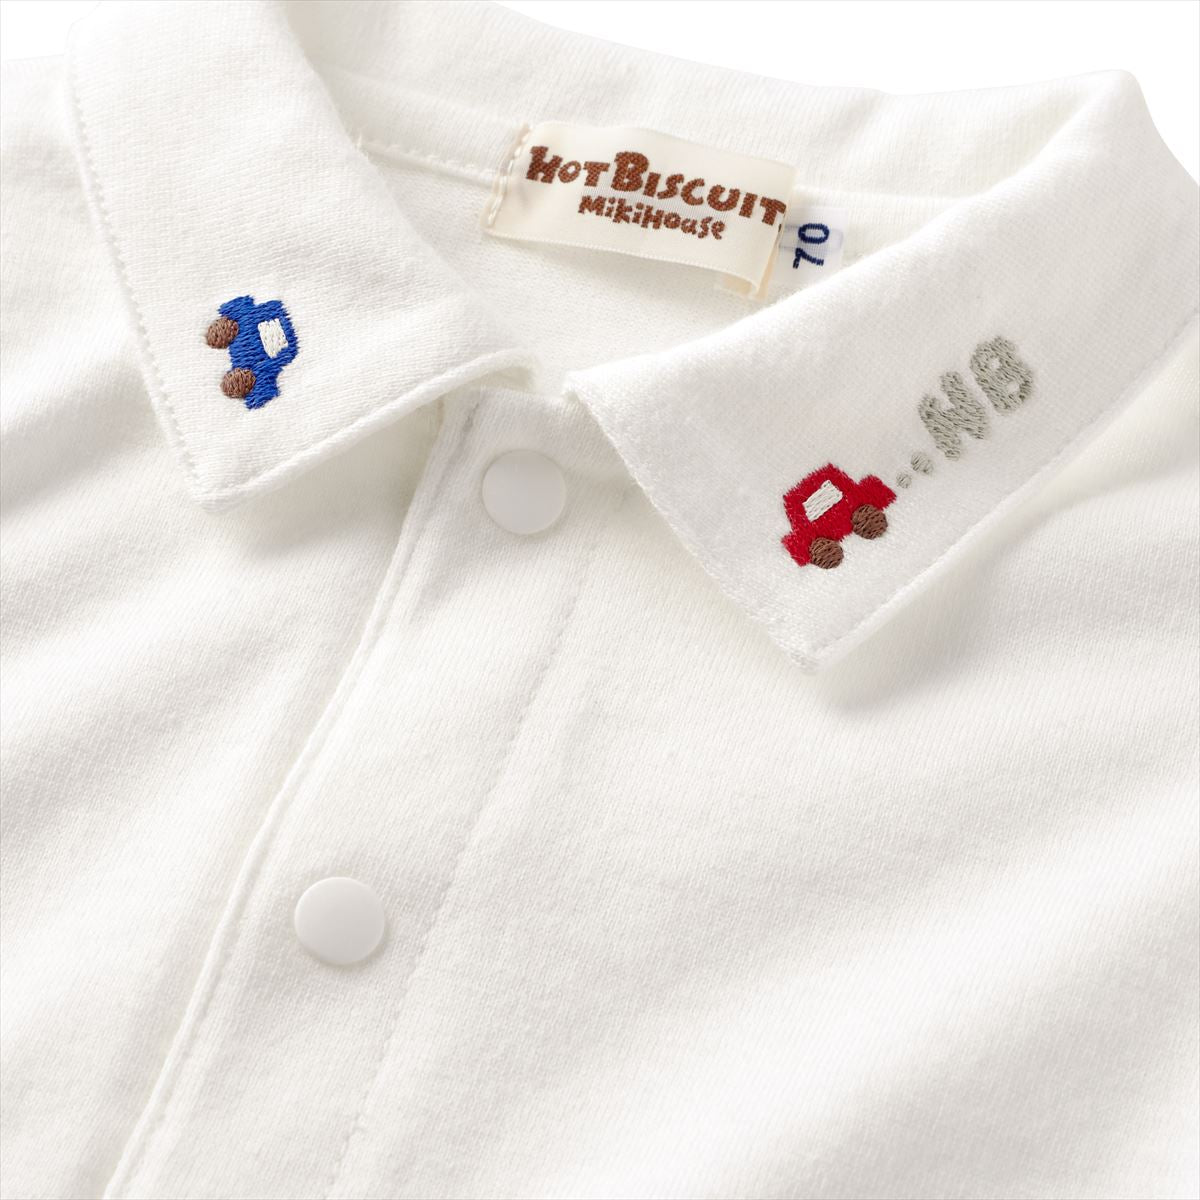 HOT BISCUITS Car Collar Long-Sleeve Polo Shirt